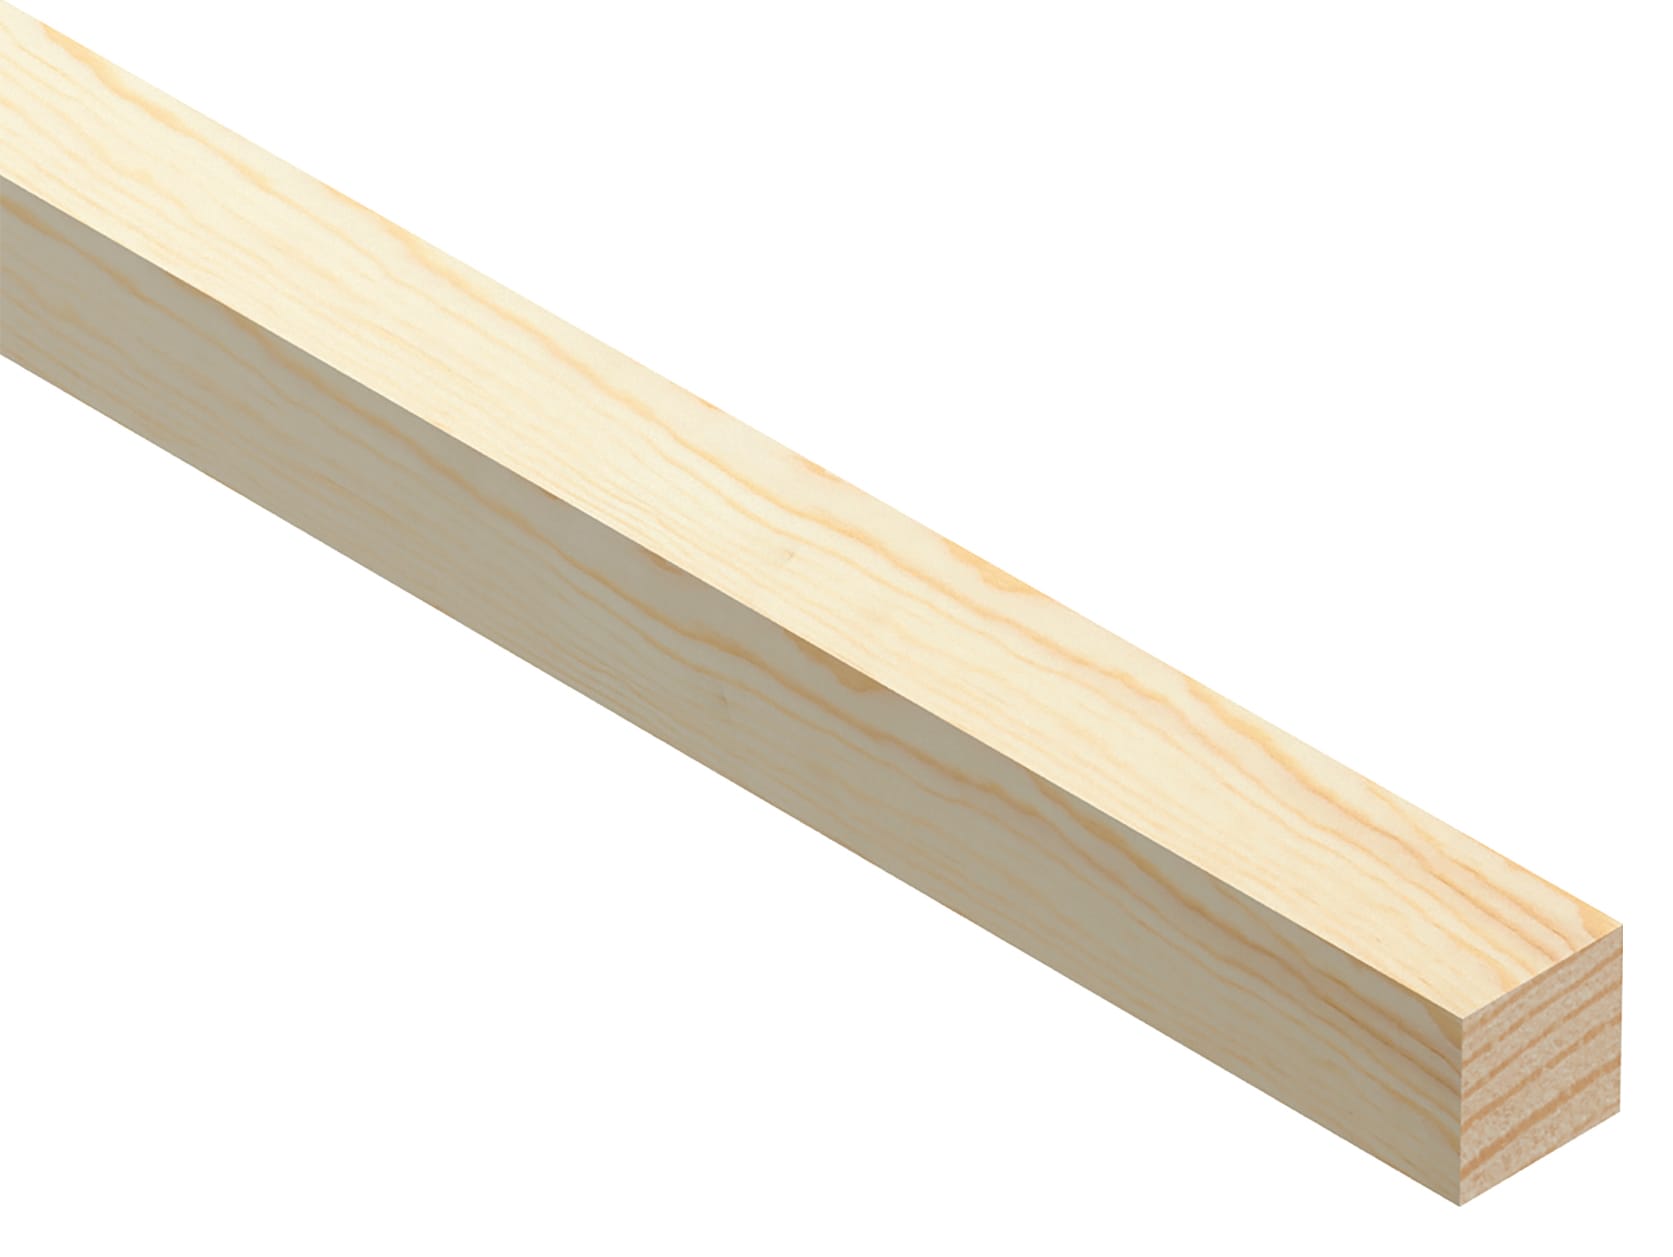 Cheshire Mouldings Pine Stripwood - 8 x 8